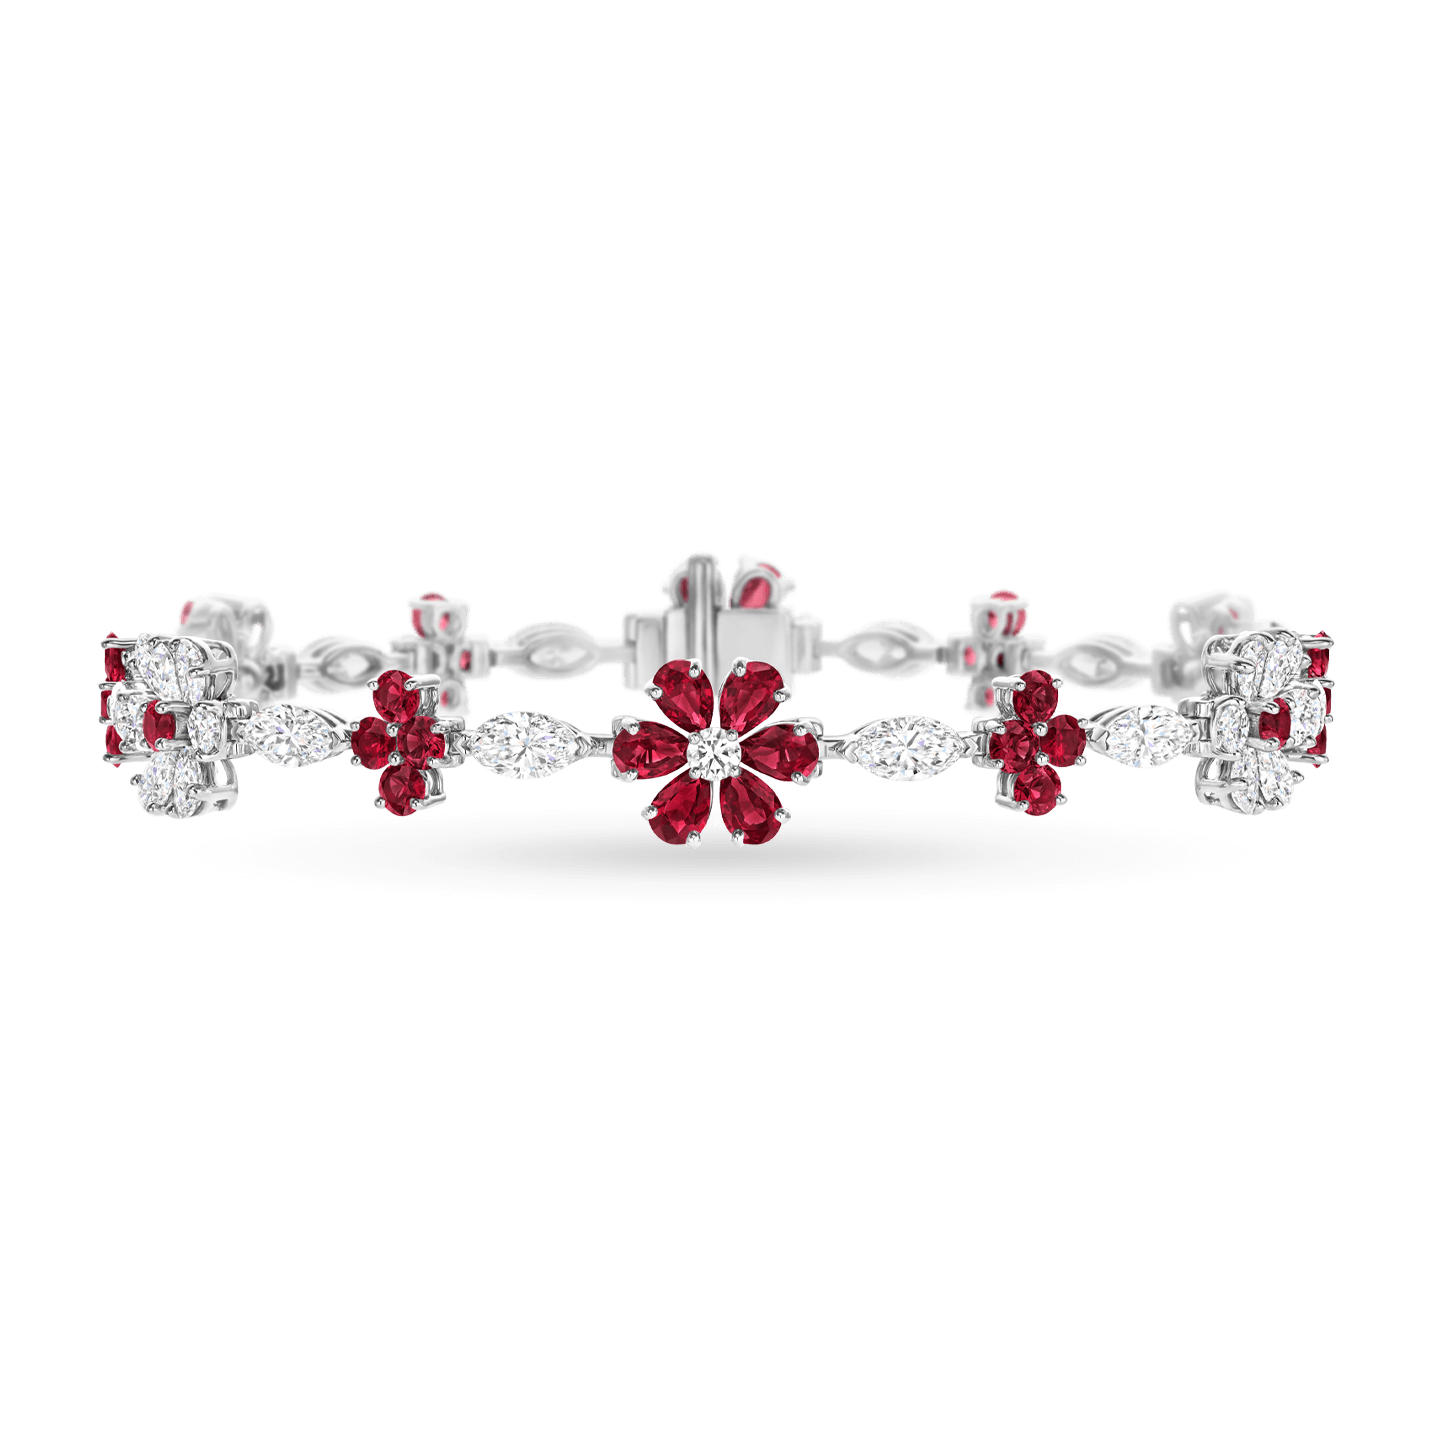 Forget-Me-Not Ruby and Diamond Bracelet, Product Image 1